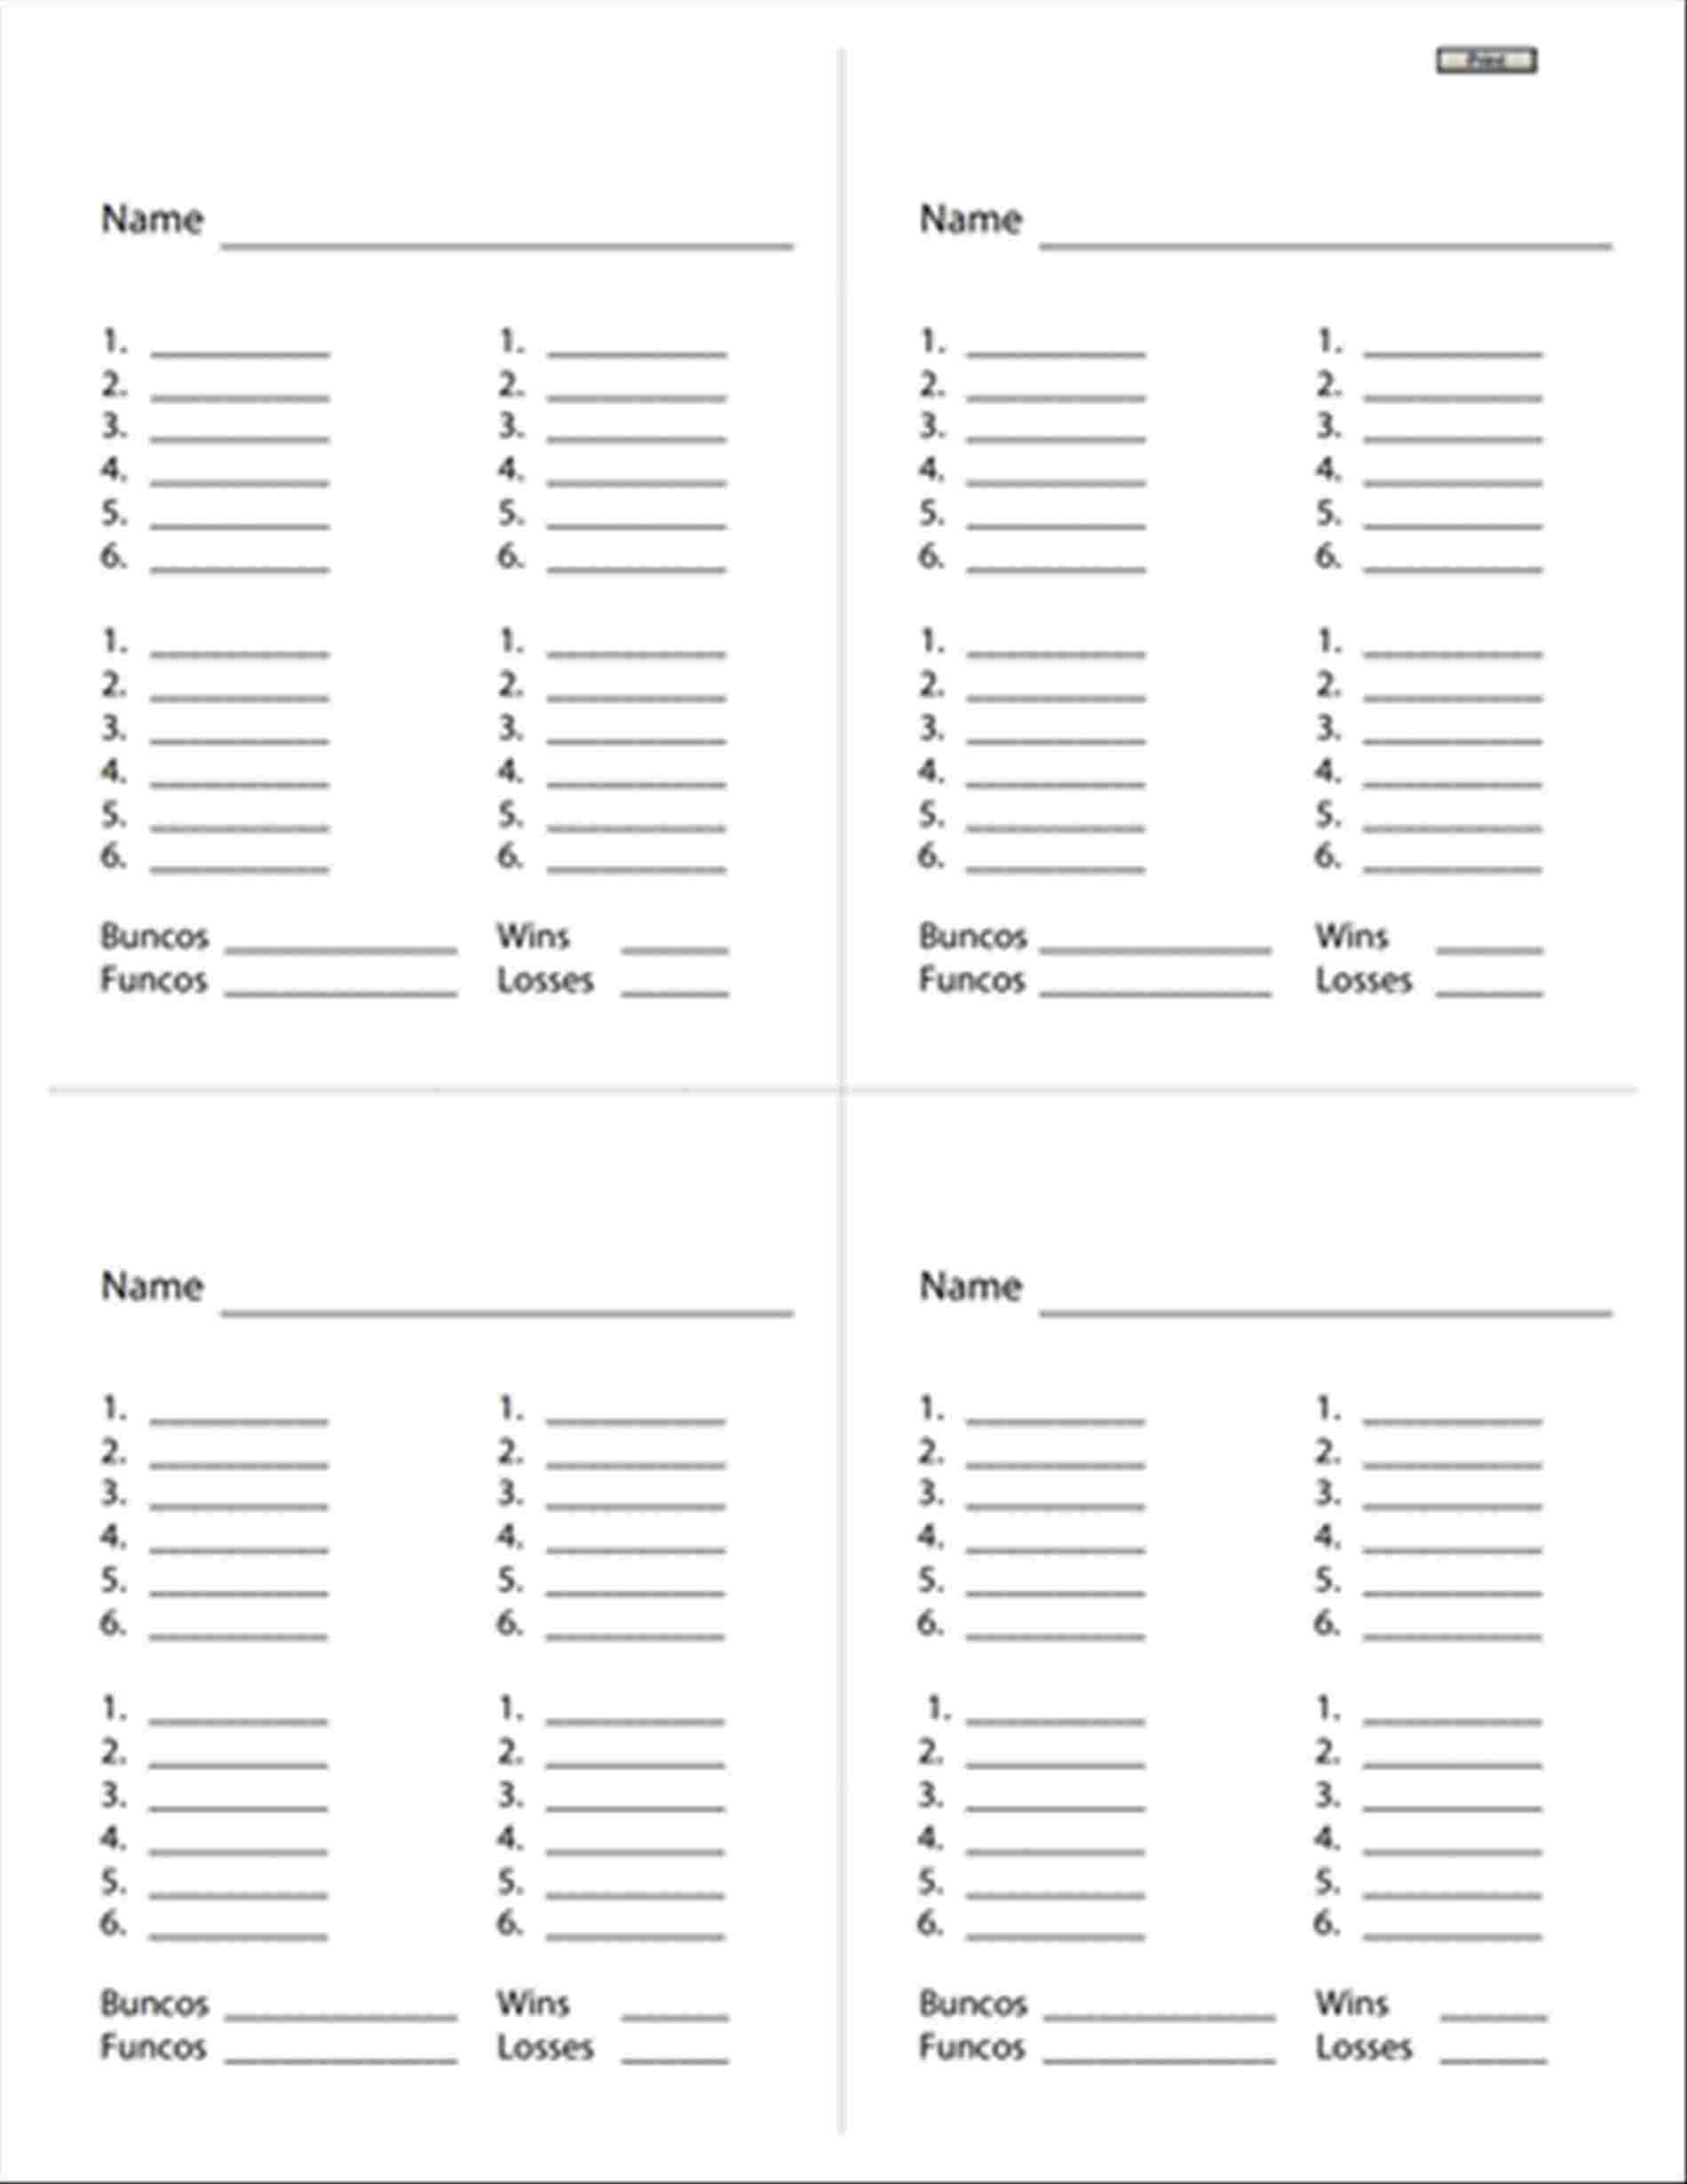 Free Printable Bunco Score Sheets (79+ Images In Collection) Page 1 - Free Printable Bunco Score Sheets